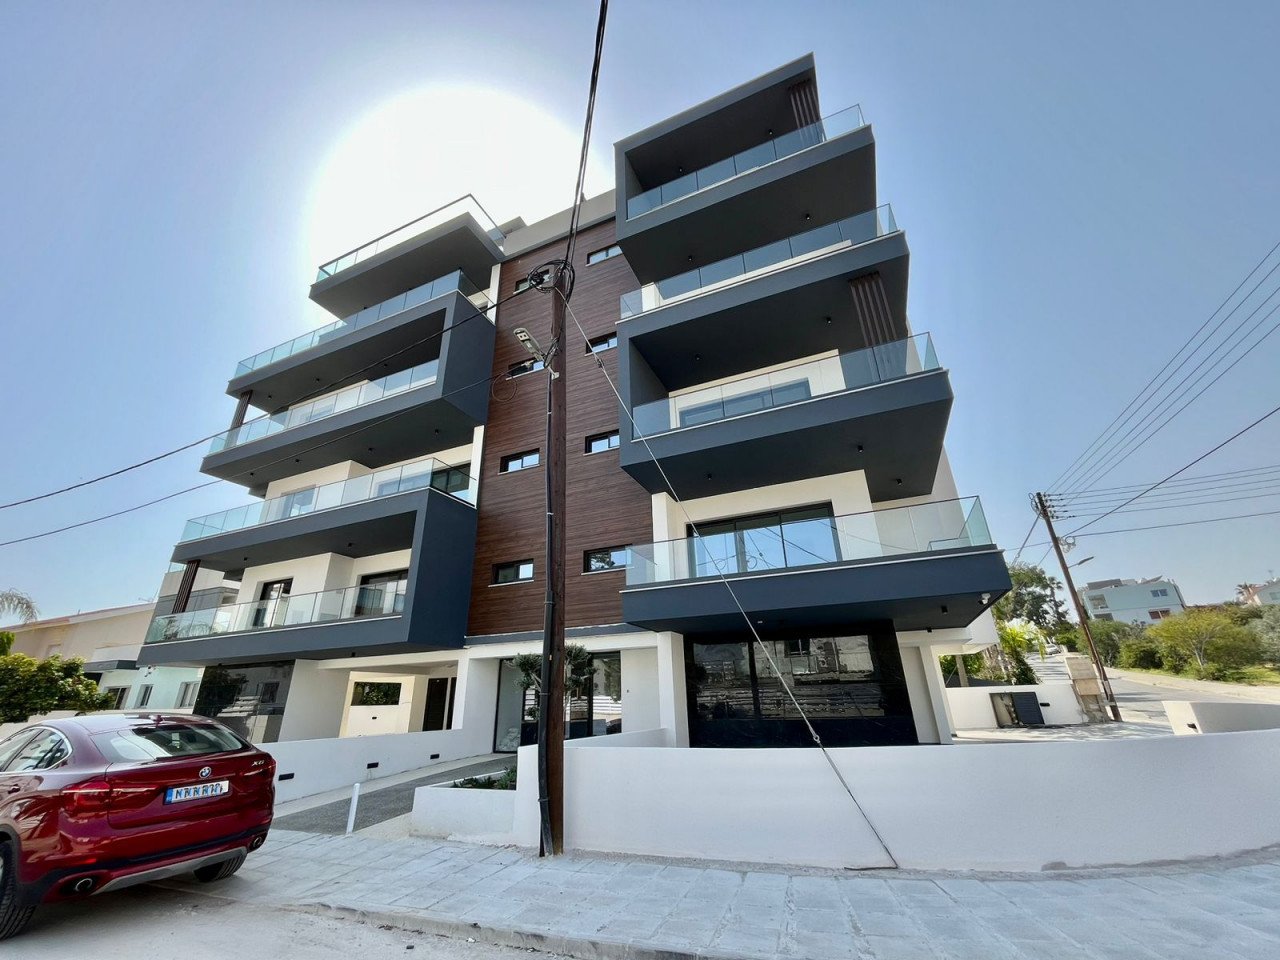 Property for Sale: Apartment (Penthouse) in Columbia, Limassol  | Key Realtor Cyprus